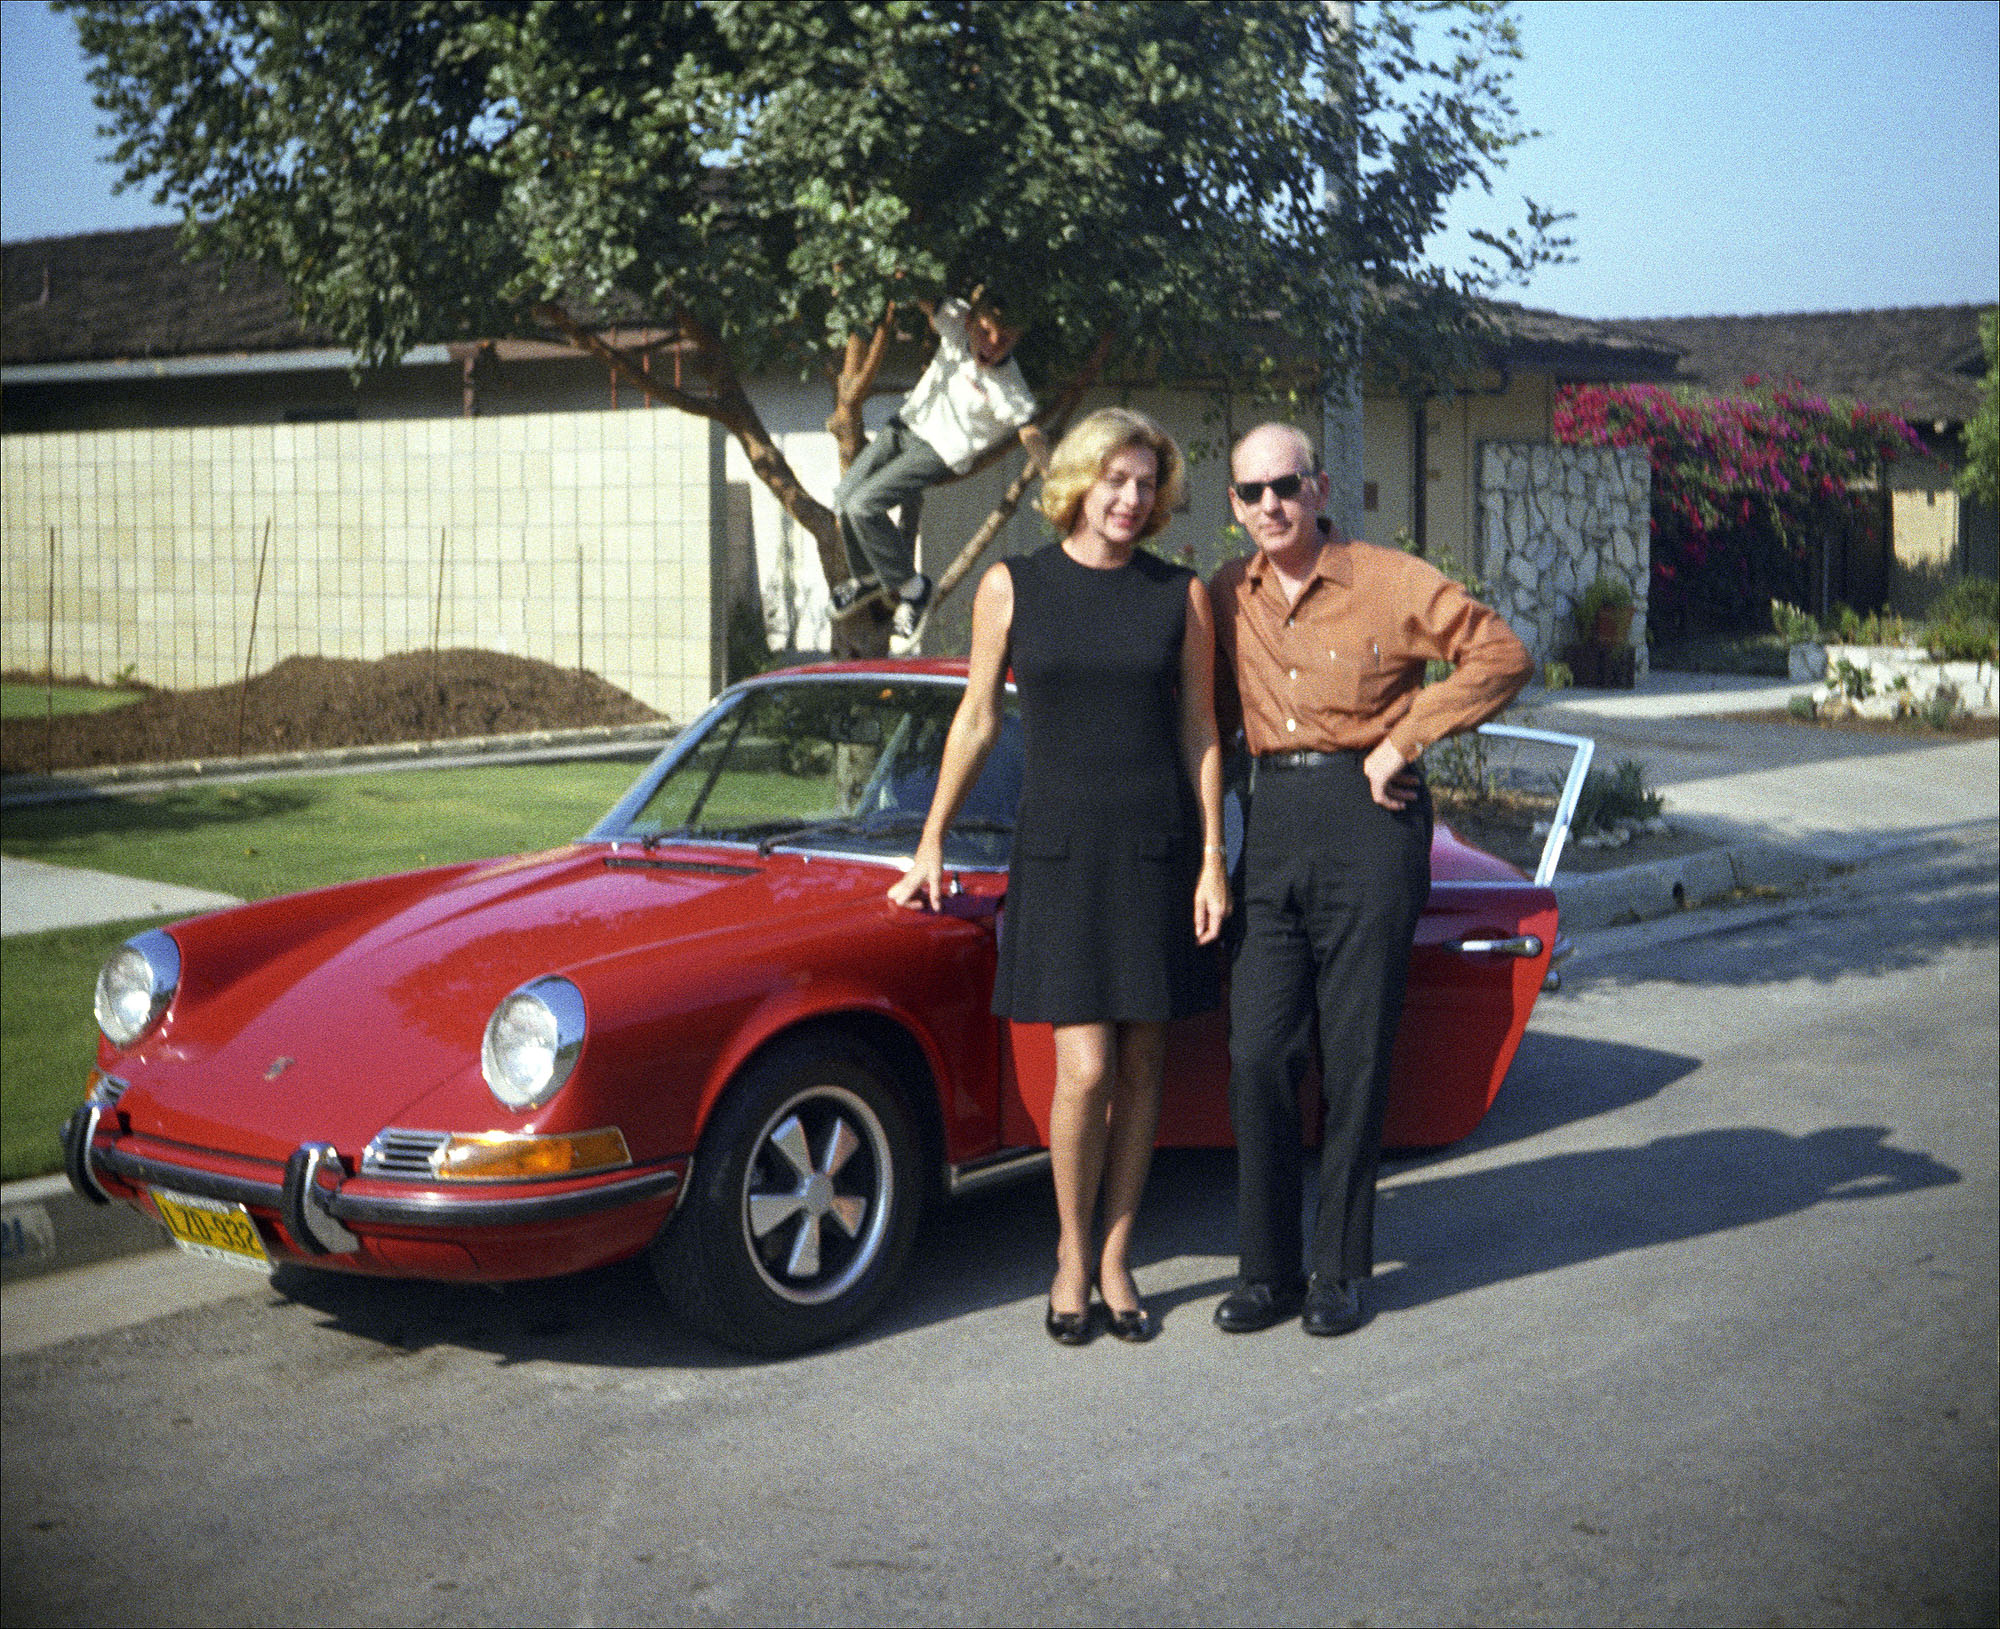 My mother, Lea, with her brother, John, and his Porsche 912 in front of my parents’ house in the Shore Cliffs development of San Clemente, Calif., in 1969 or 1970. Scanned from the original 126 negative. My father was the photographer and the boy in the tree is yours truly! I have just been given boxes upon boxes of negatives and slides that my mother had kept in a closet for all these years. The prints are small, faded and almost colorless now. I hope to find many treasures in the following months. This is my first submission to Shorpy. View full size.